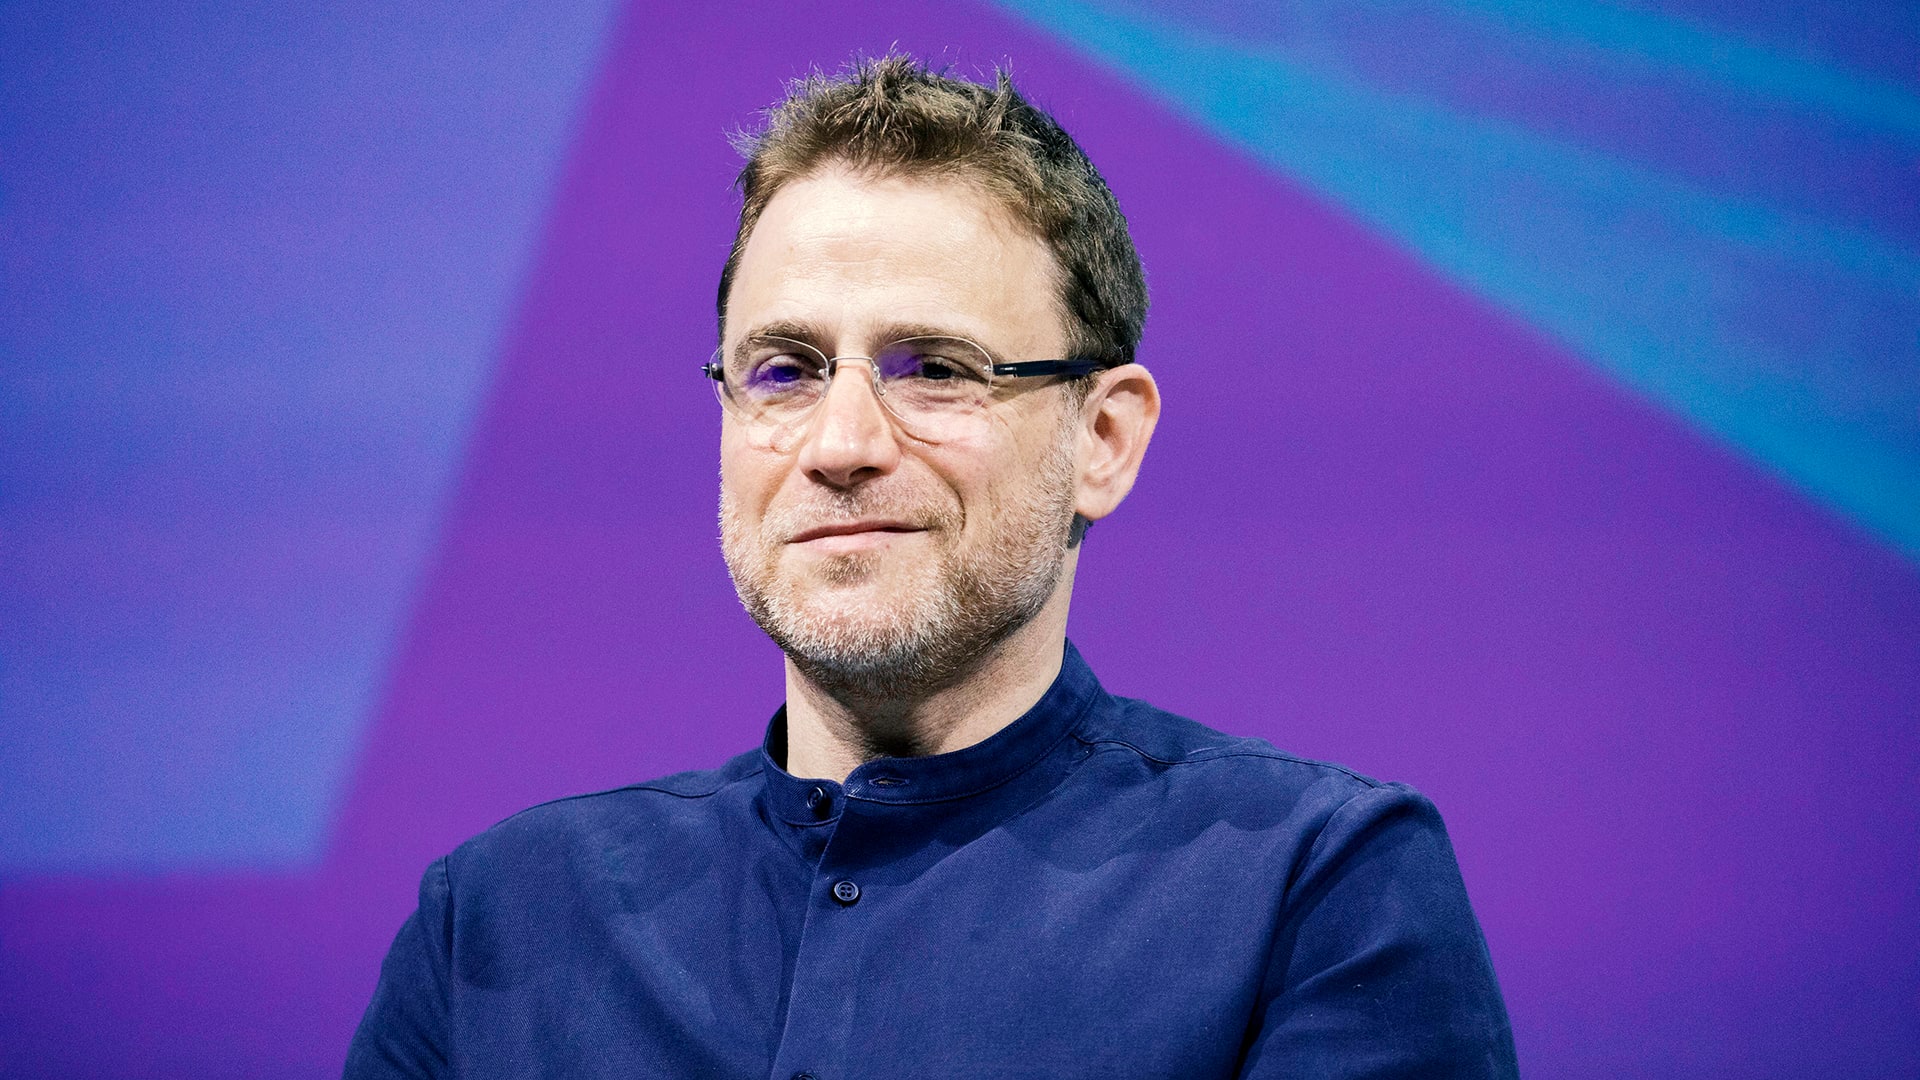 Report: Slack is planning a direct IPO in 2019, like Spotify did last year